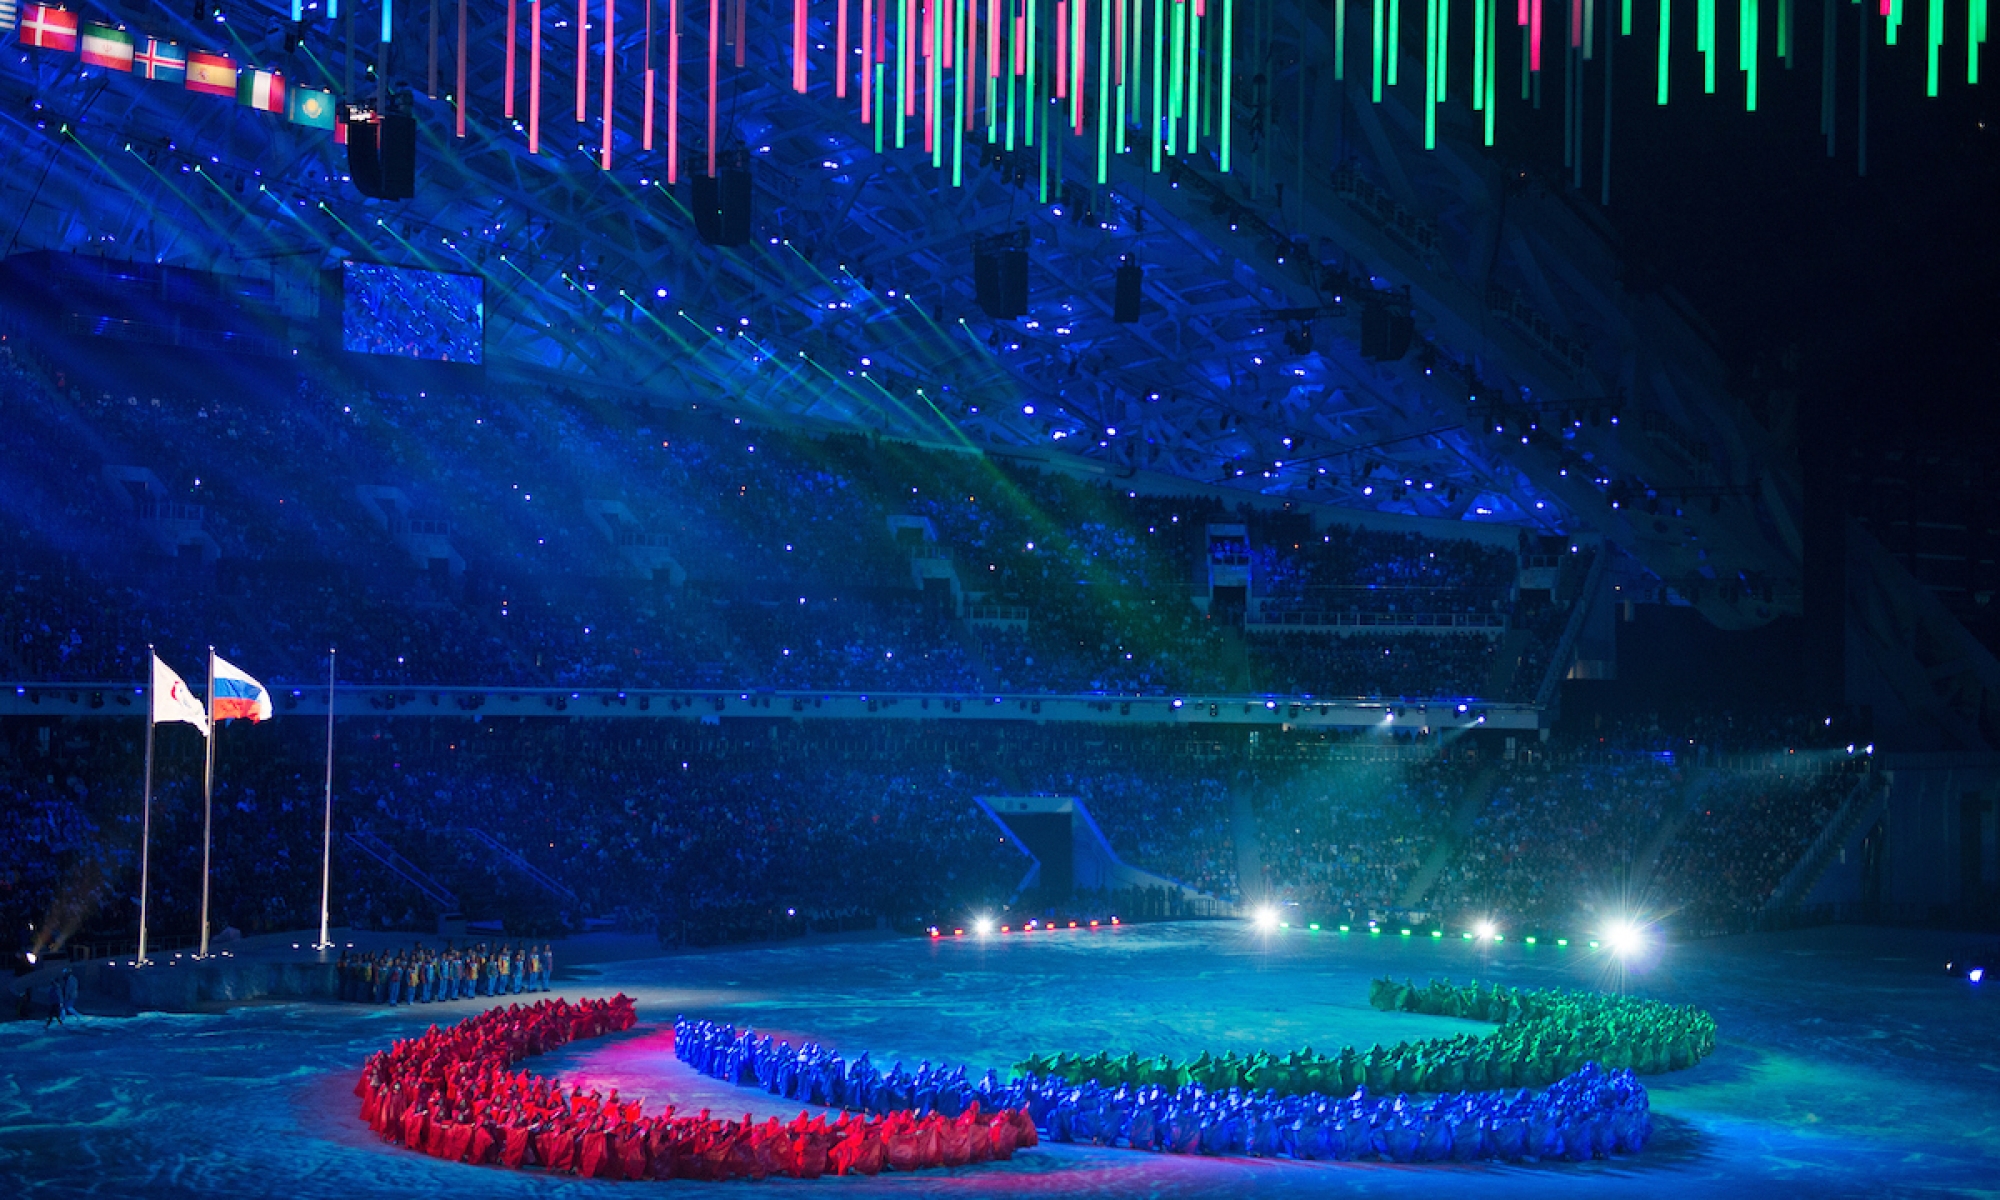 IPC logo made out of people at the Sochi closing cereomies